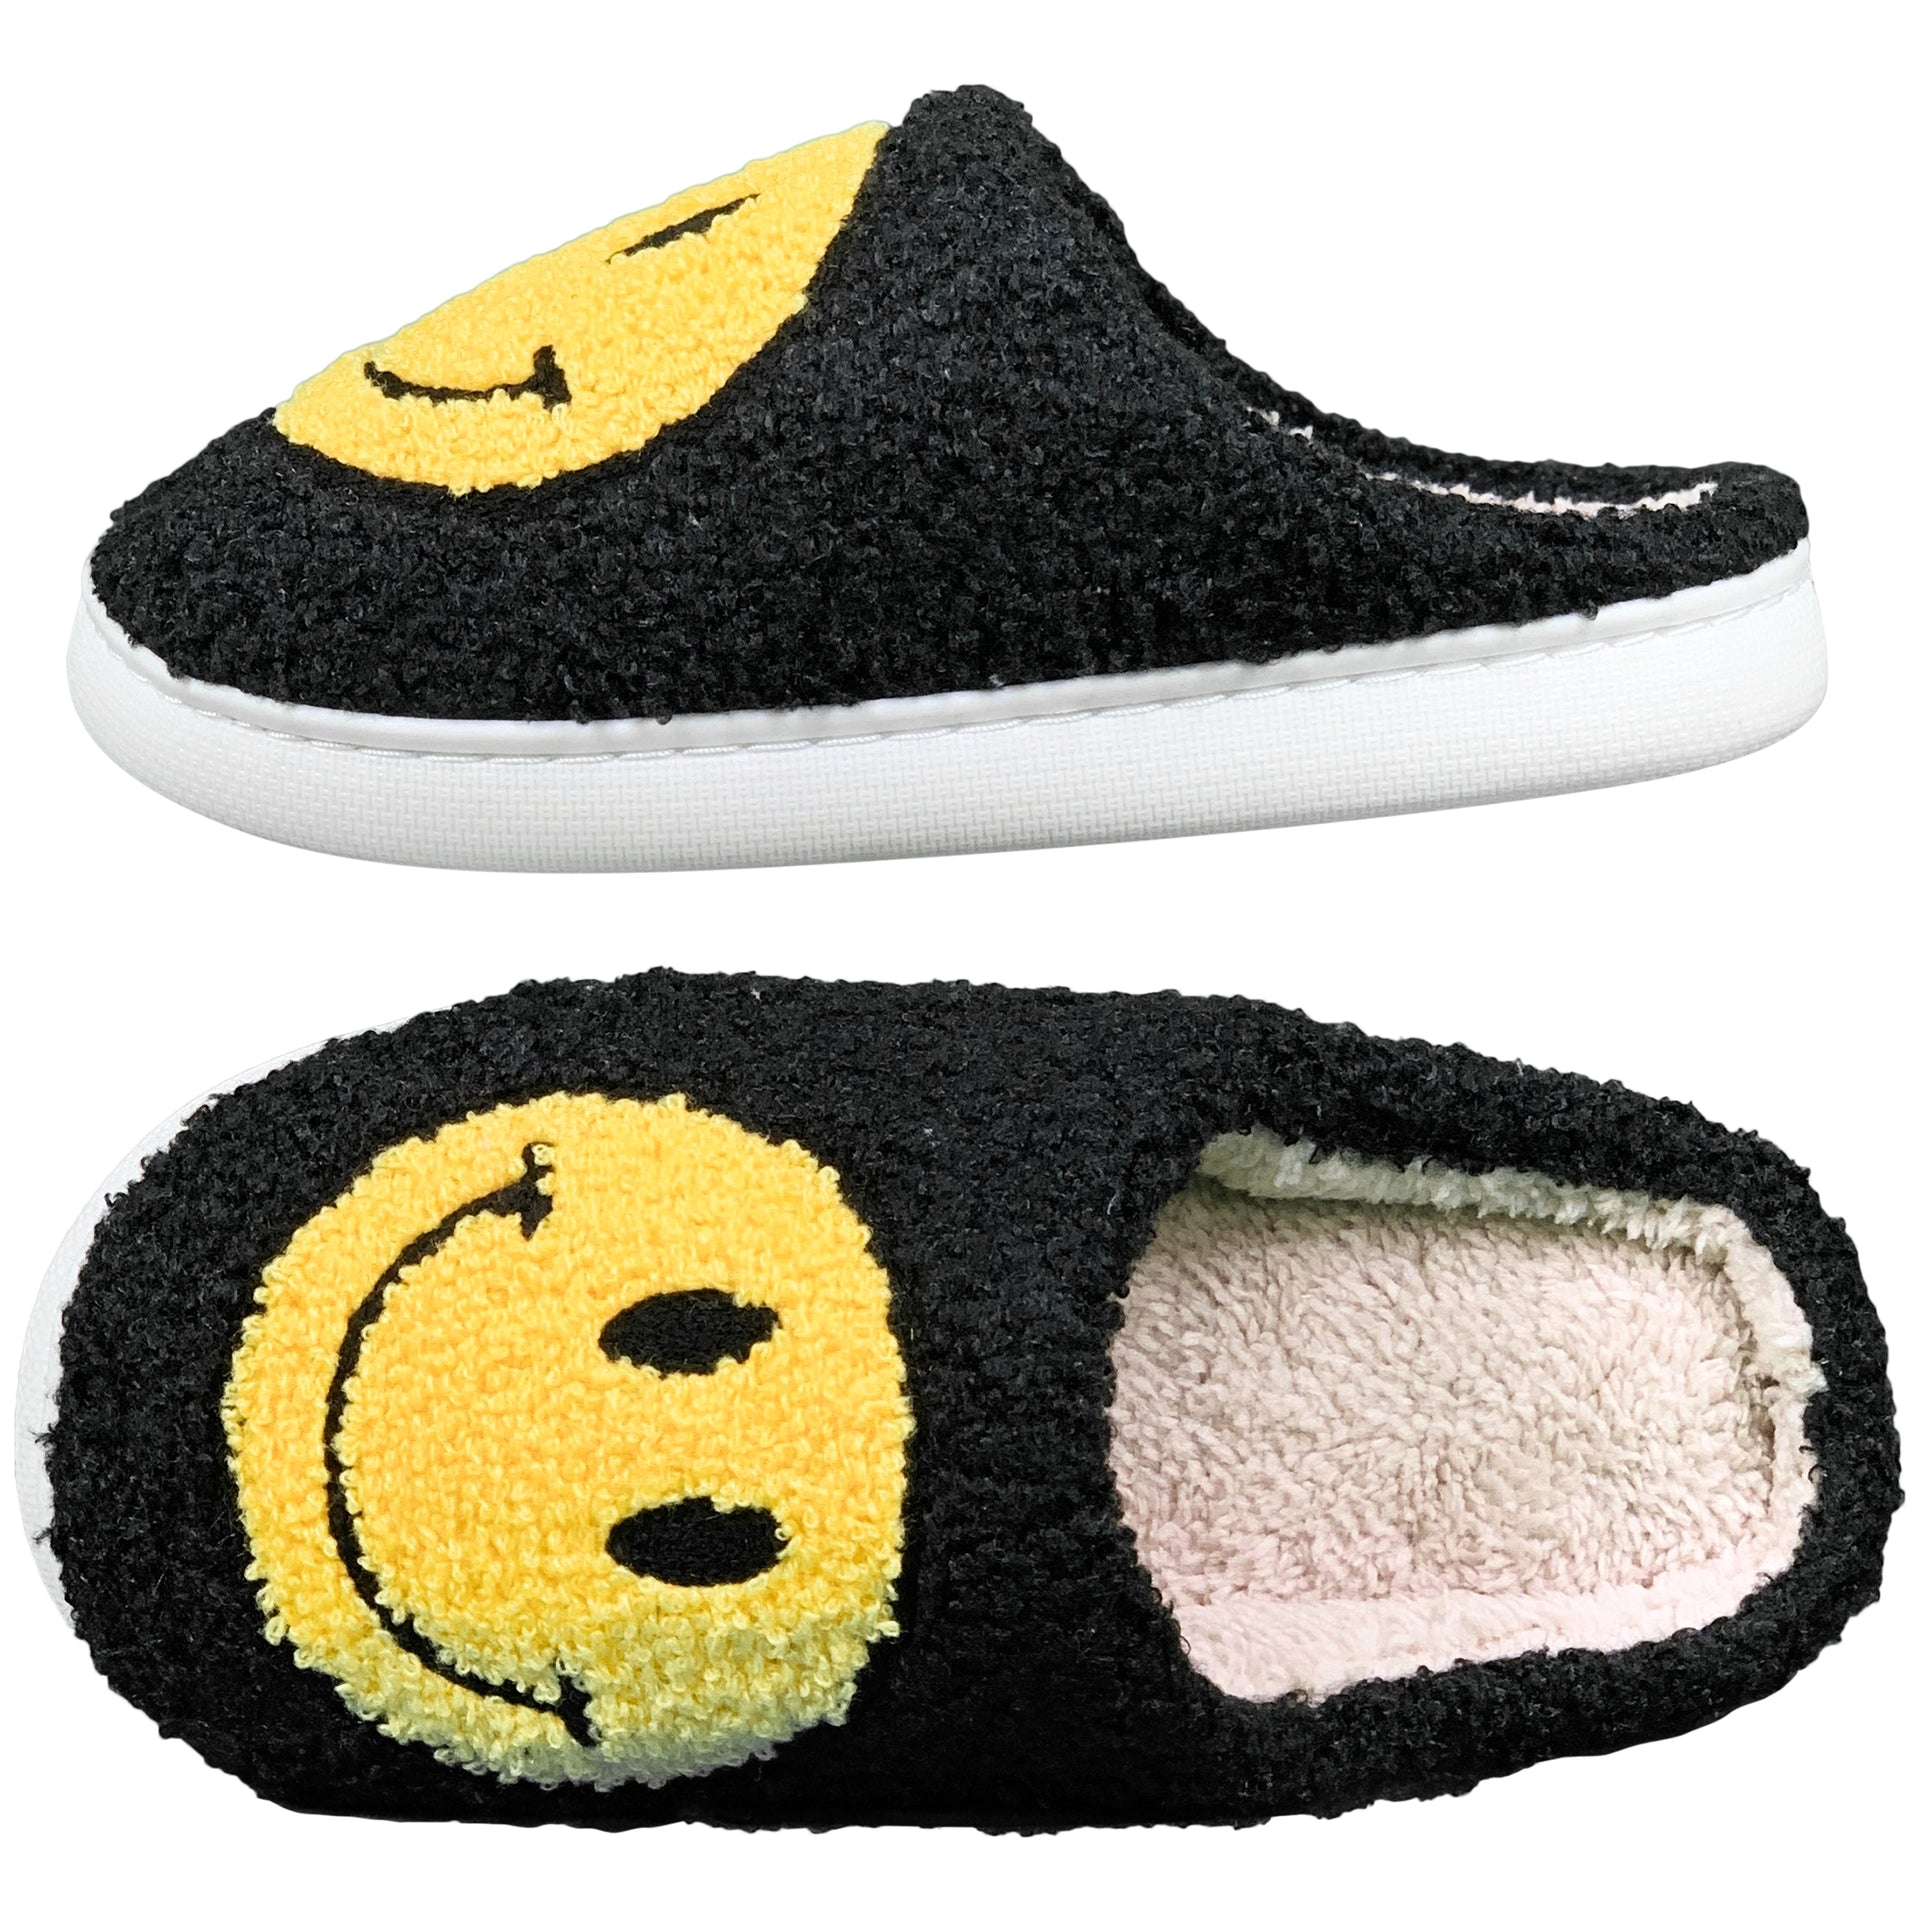 Wearing All Smiles A Fashion Journey with Black Smiley Face Slippers